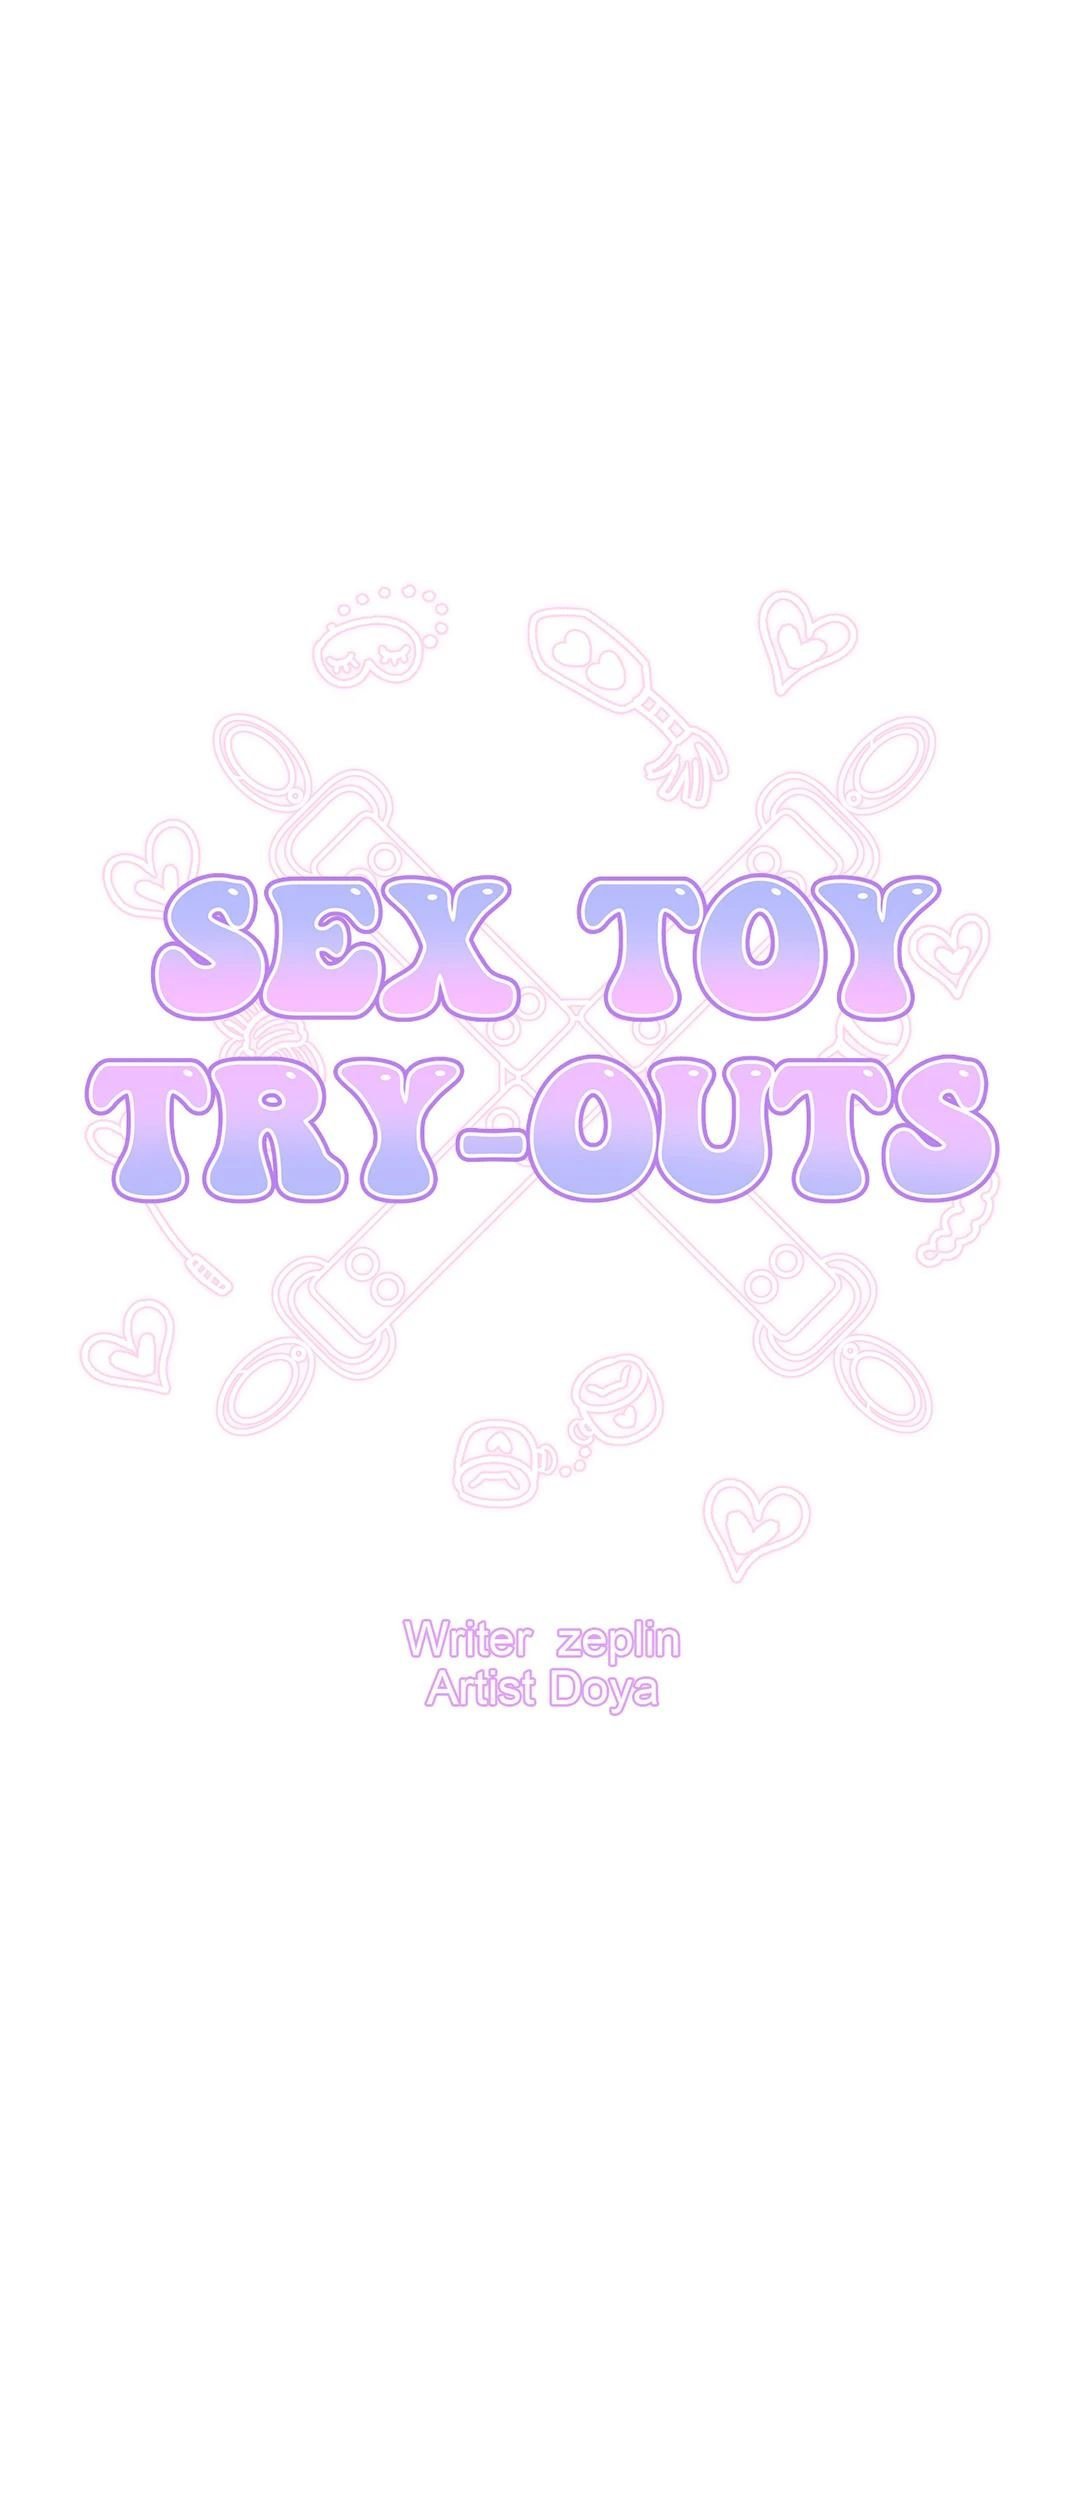 sex-toy-try-outs-chap-17-4